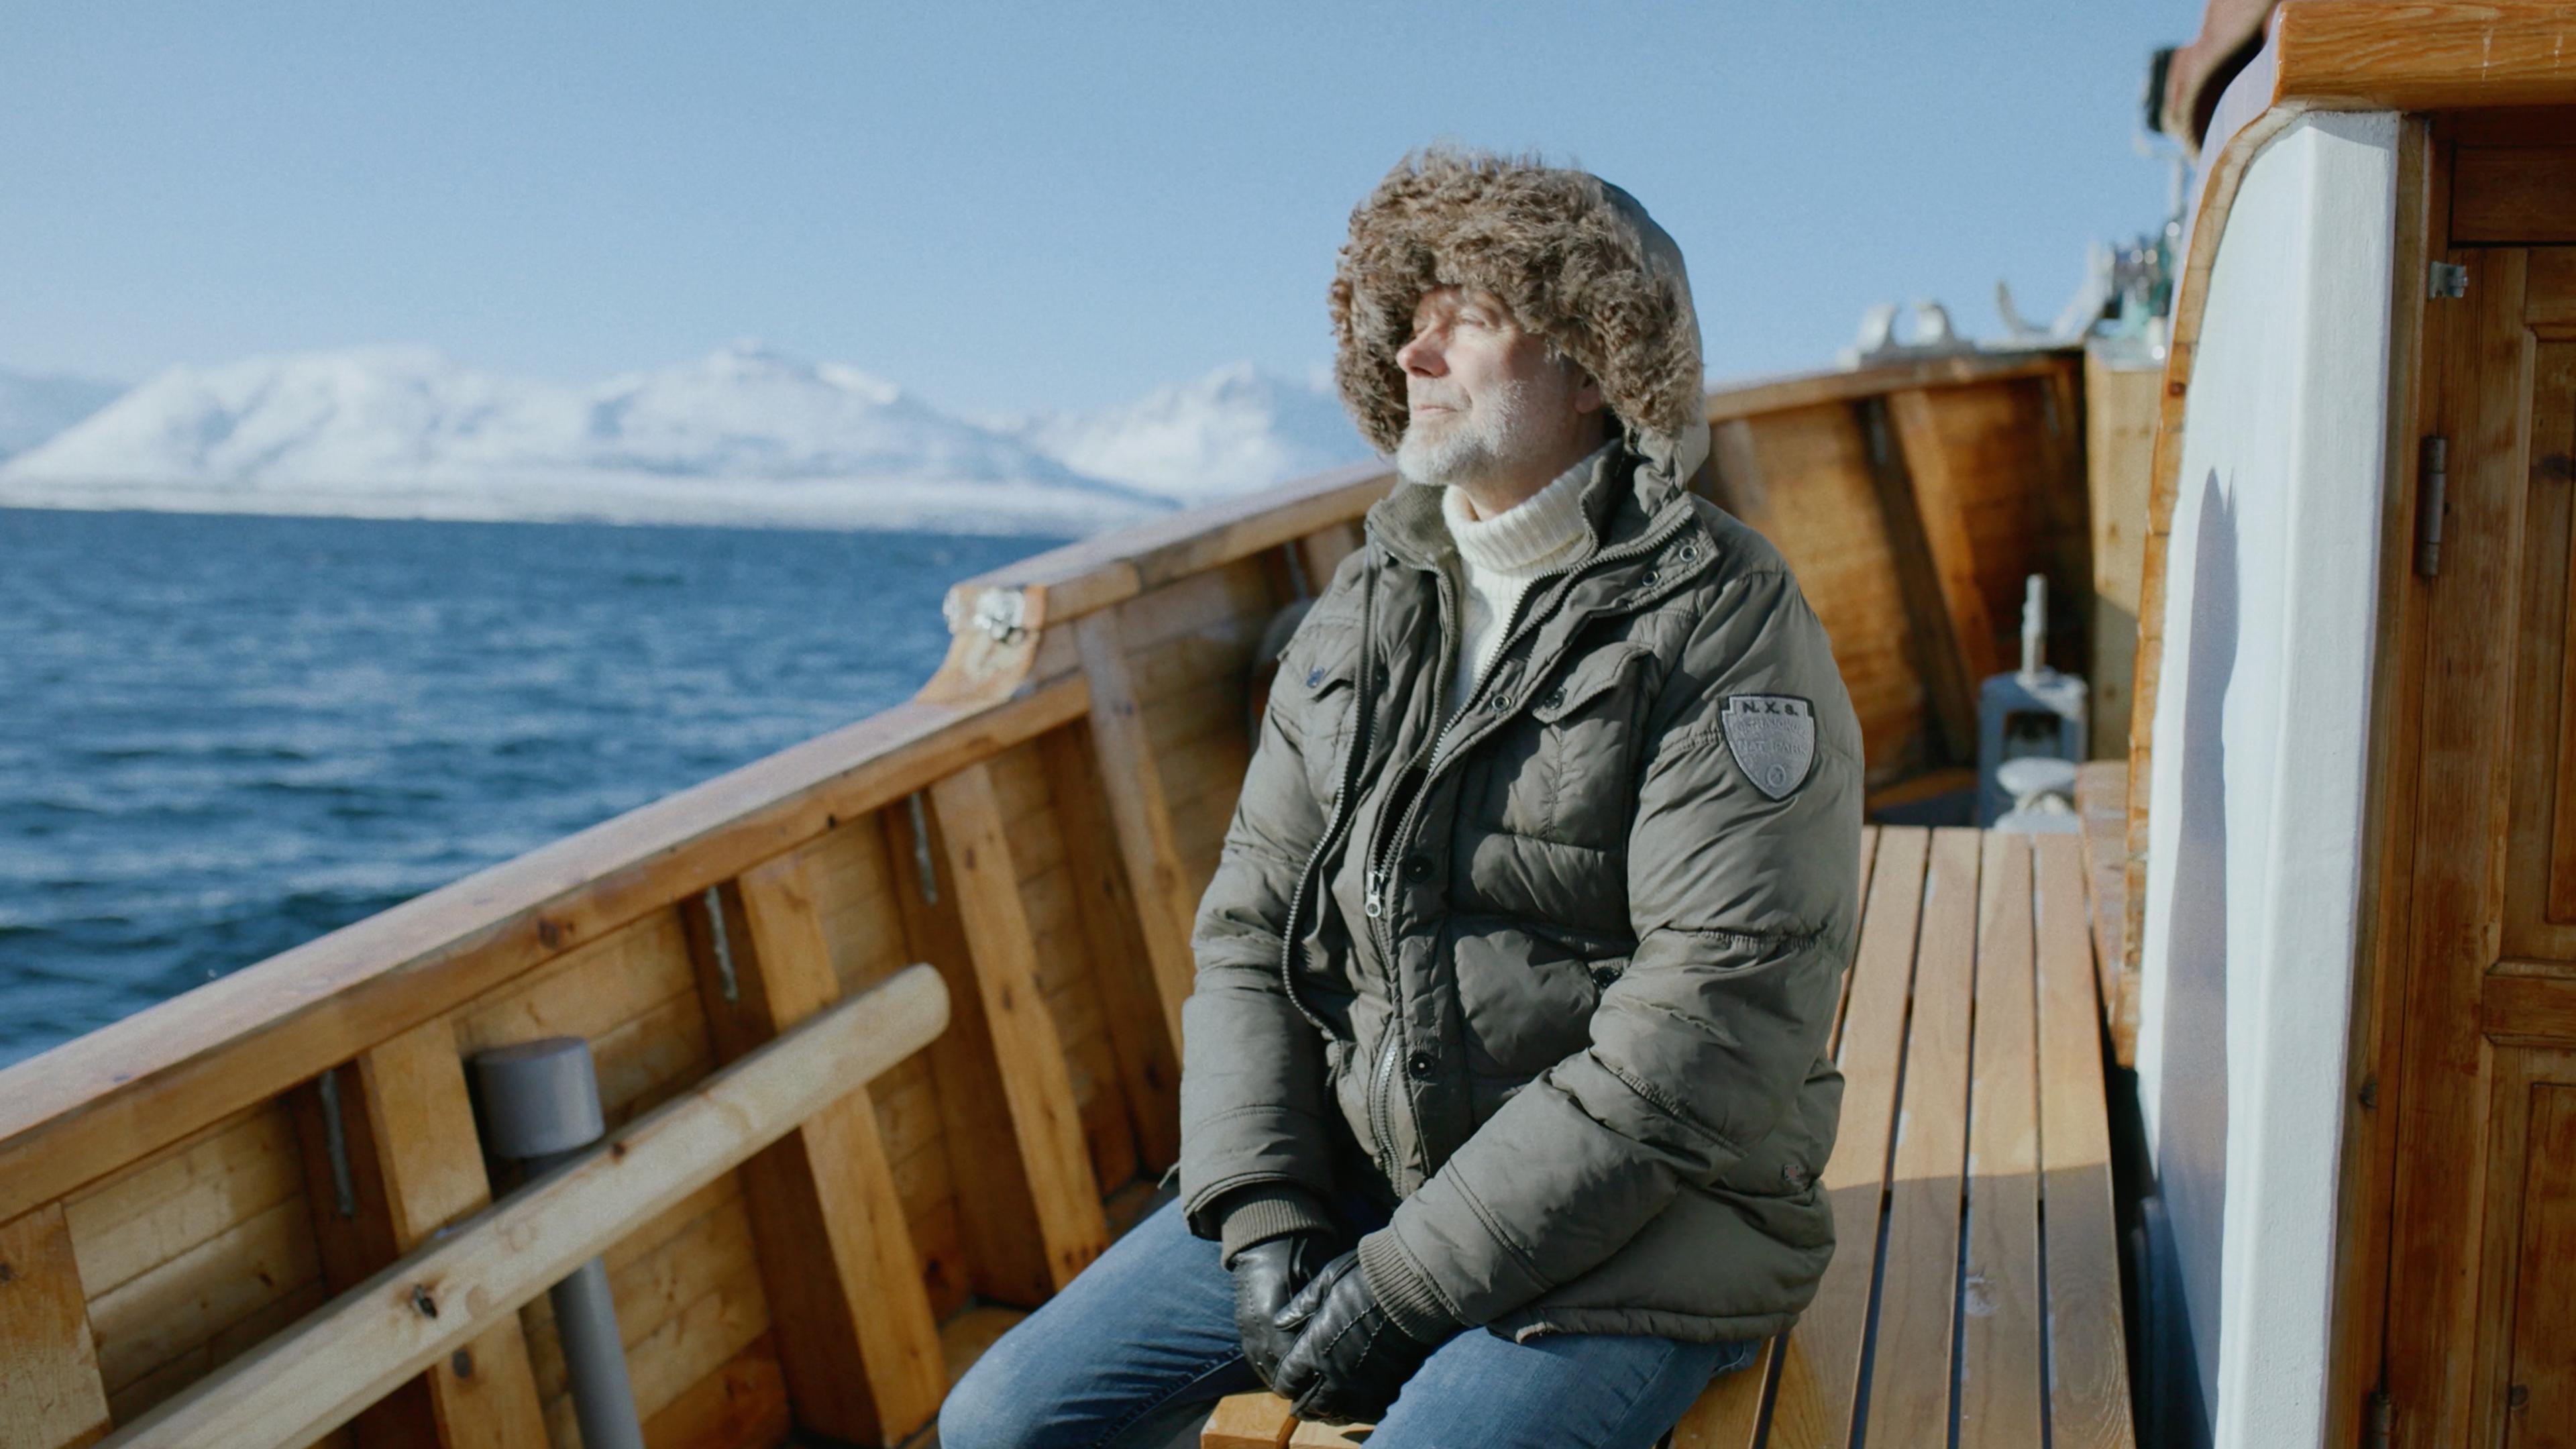 A man in winter clothing sits on a wooden boat, eyes half closed, with a snowy mountain landscape and water in the background.